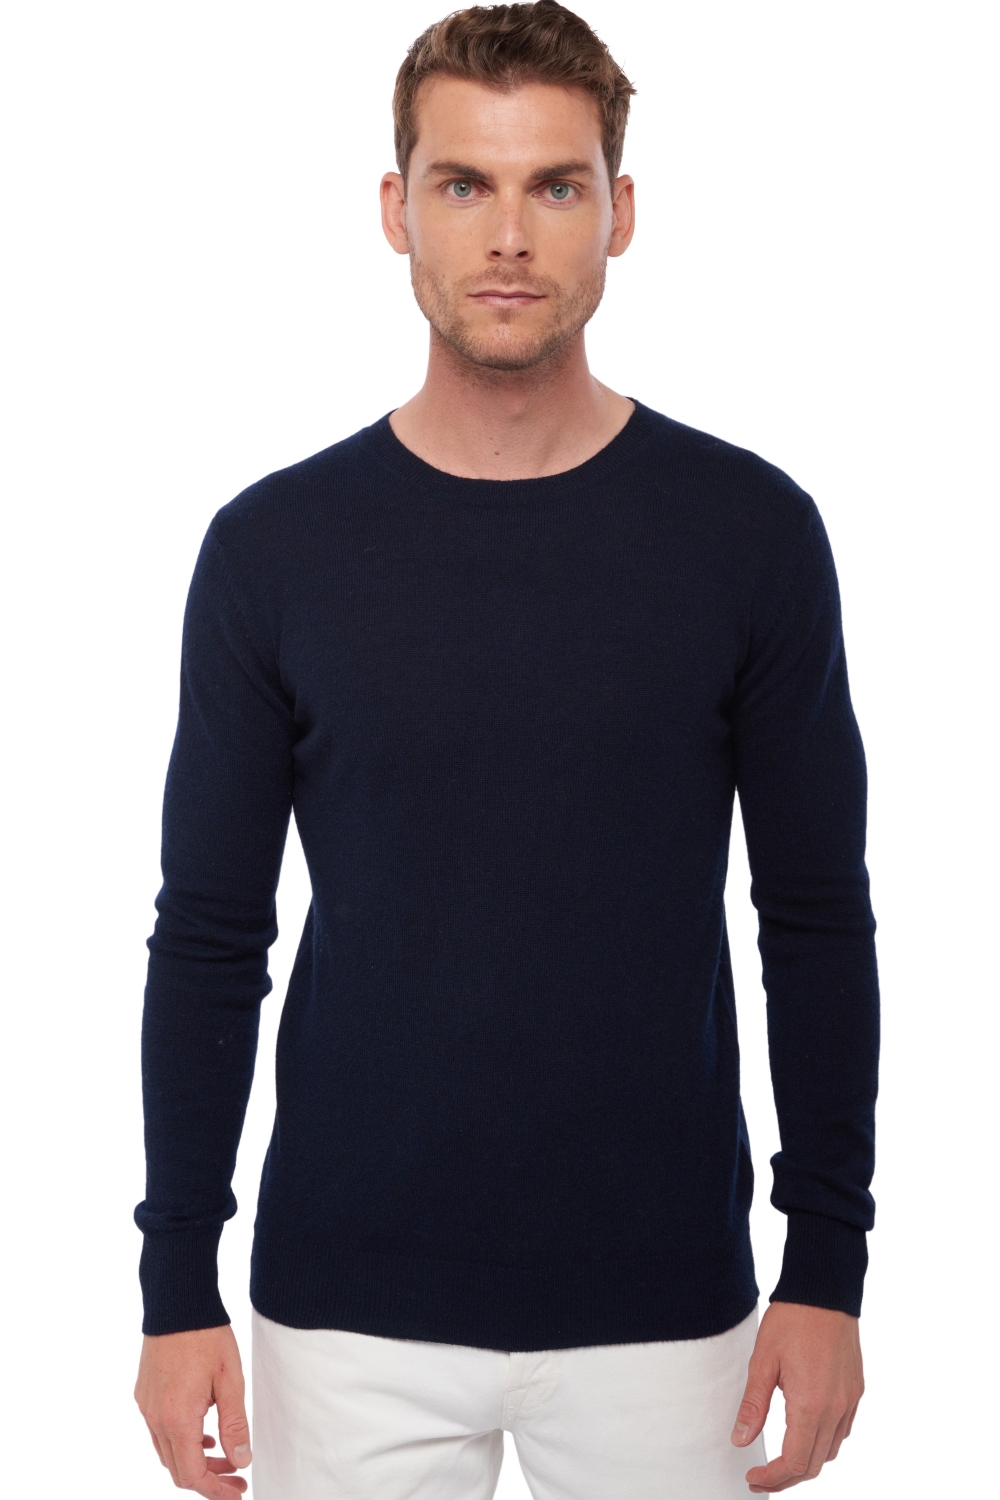 Cachemire pull homme tao first marine fonce xl